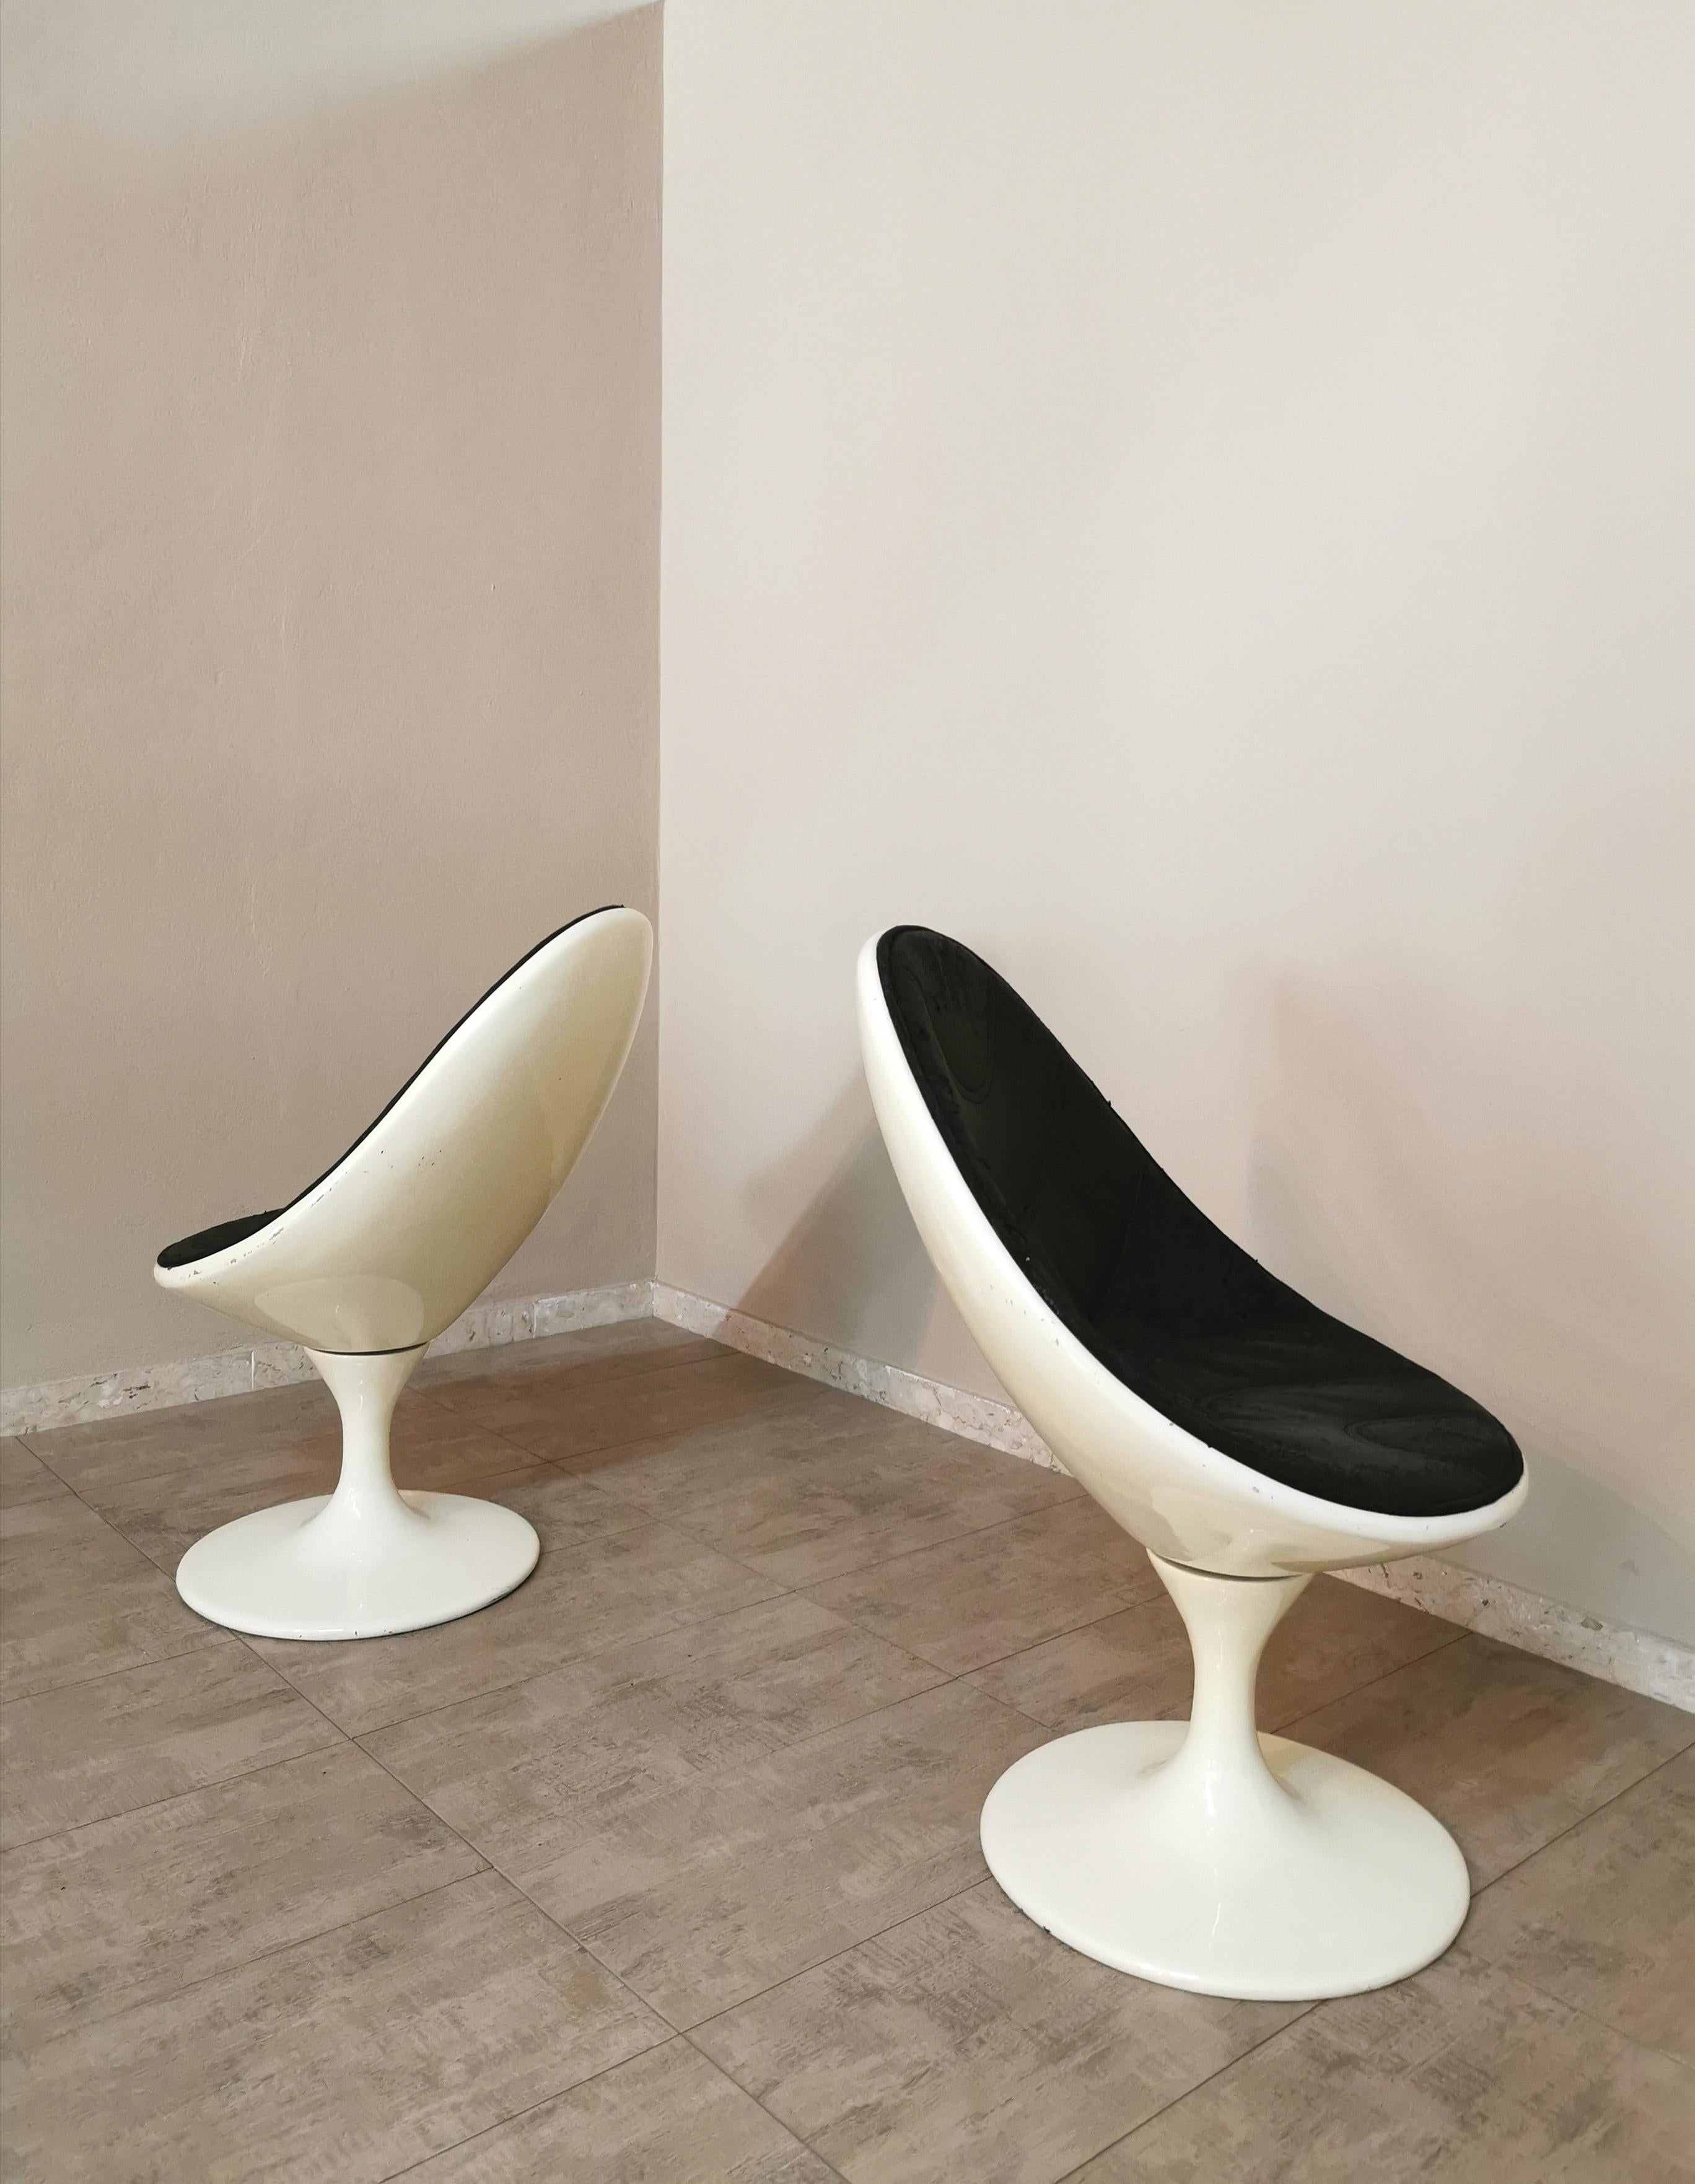 Italian Midcentury Swivel Chairs Curved Resin Black White Leather Italy 1970s Set of 2